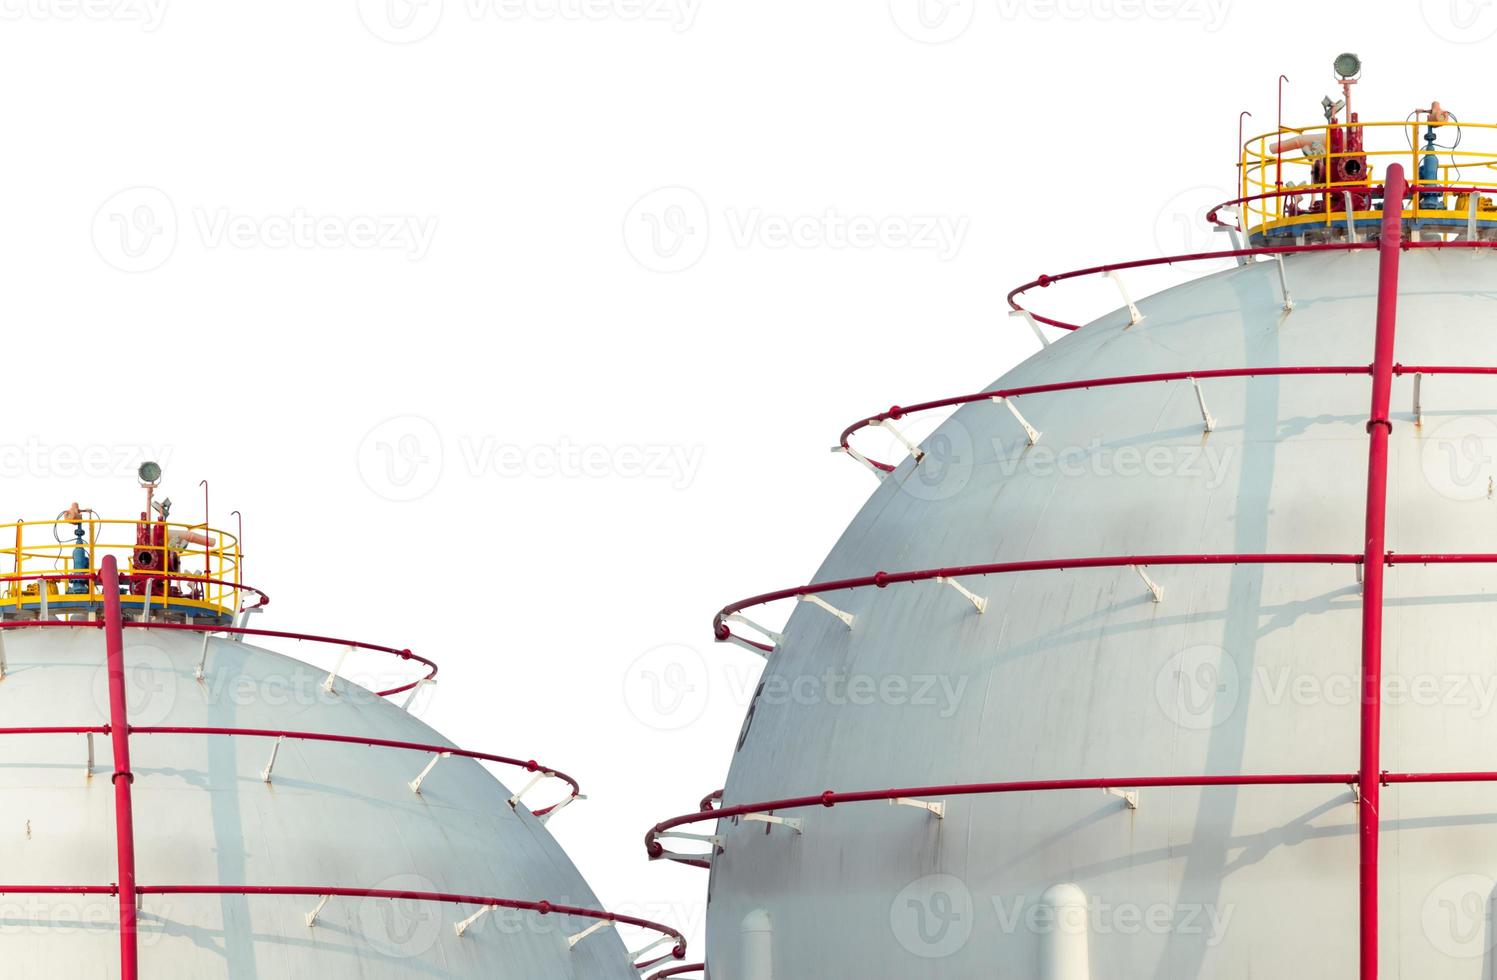 Industrial gas storage tank isolated on white background. LNG or liquefied natural gas storage tank. Spherical gas tank in petroleum refinery. Above-ground storage tank. Natural gas storage industry. photo